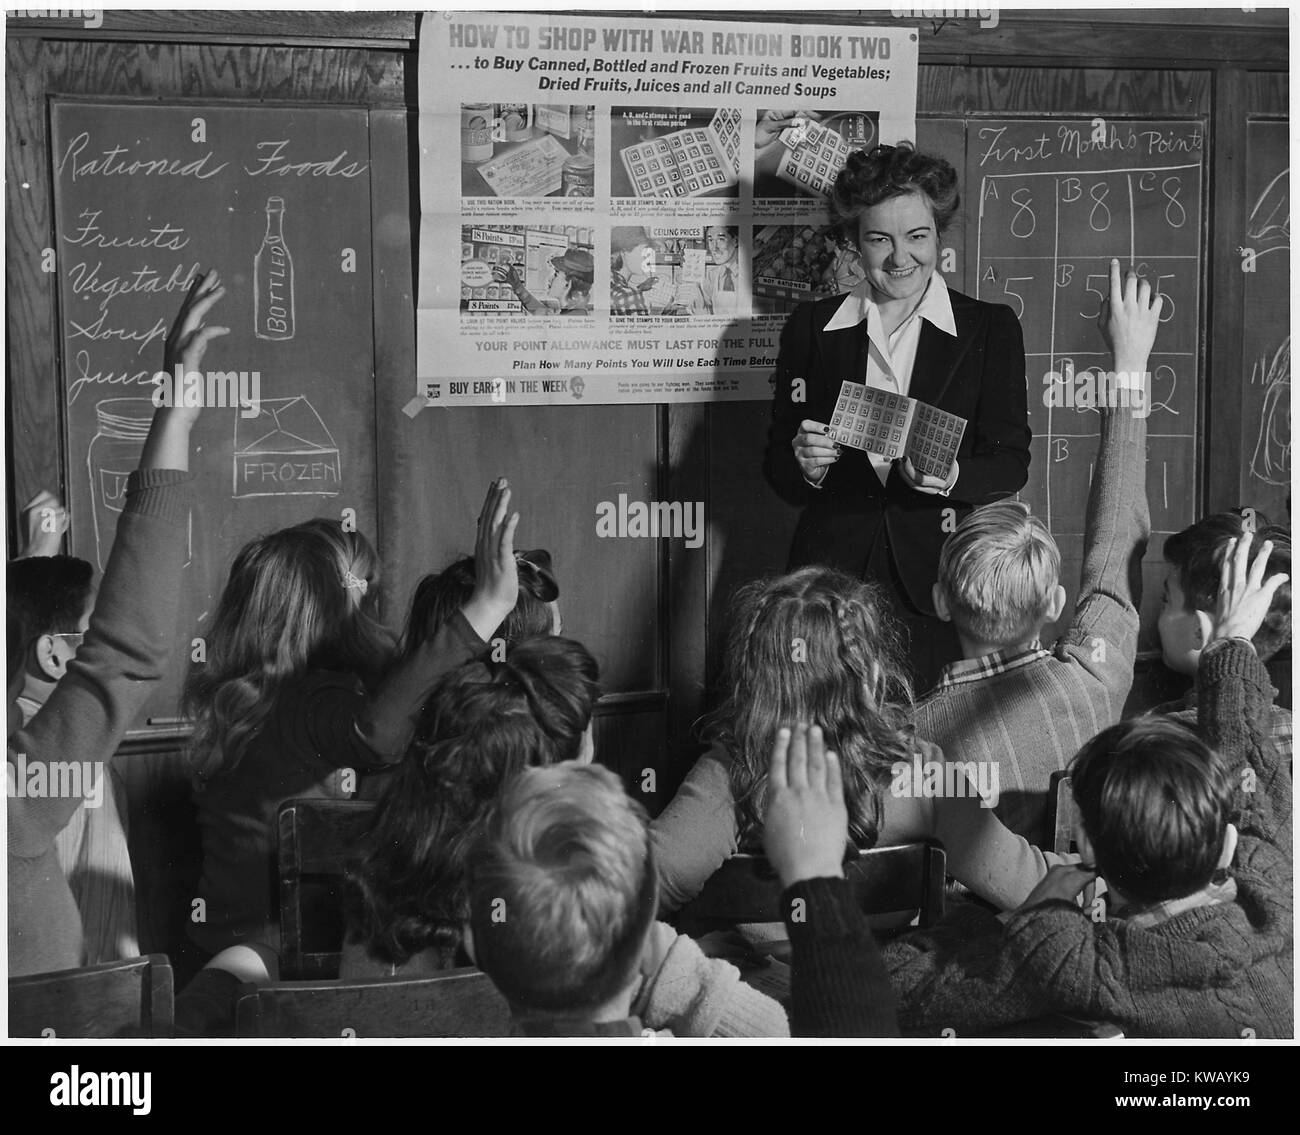 A sixth grade teacher shows her pupils on how to use War Ration Book Two, February, 1943. Stock Photo